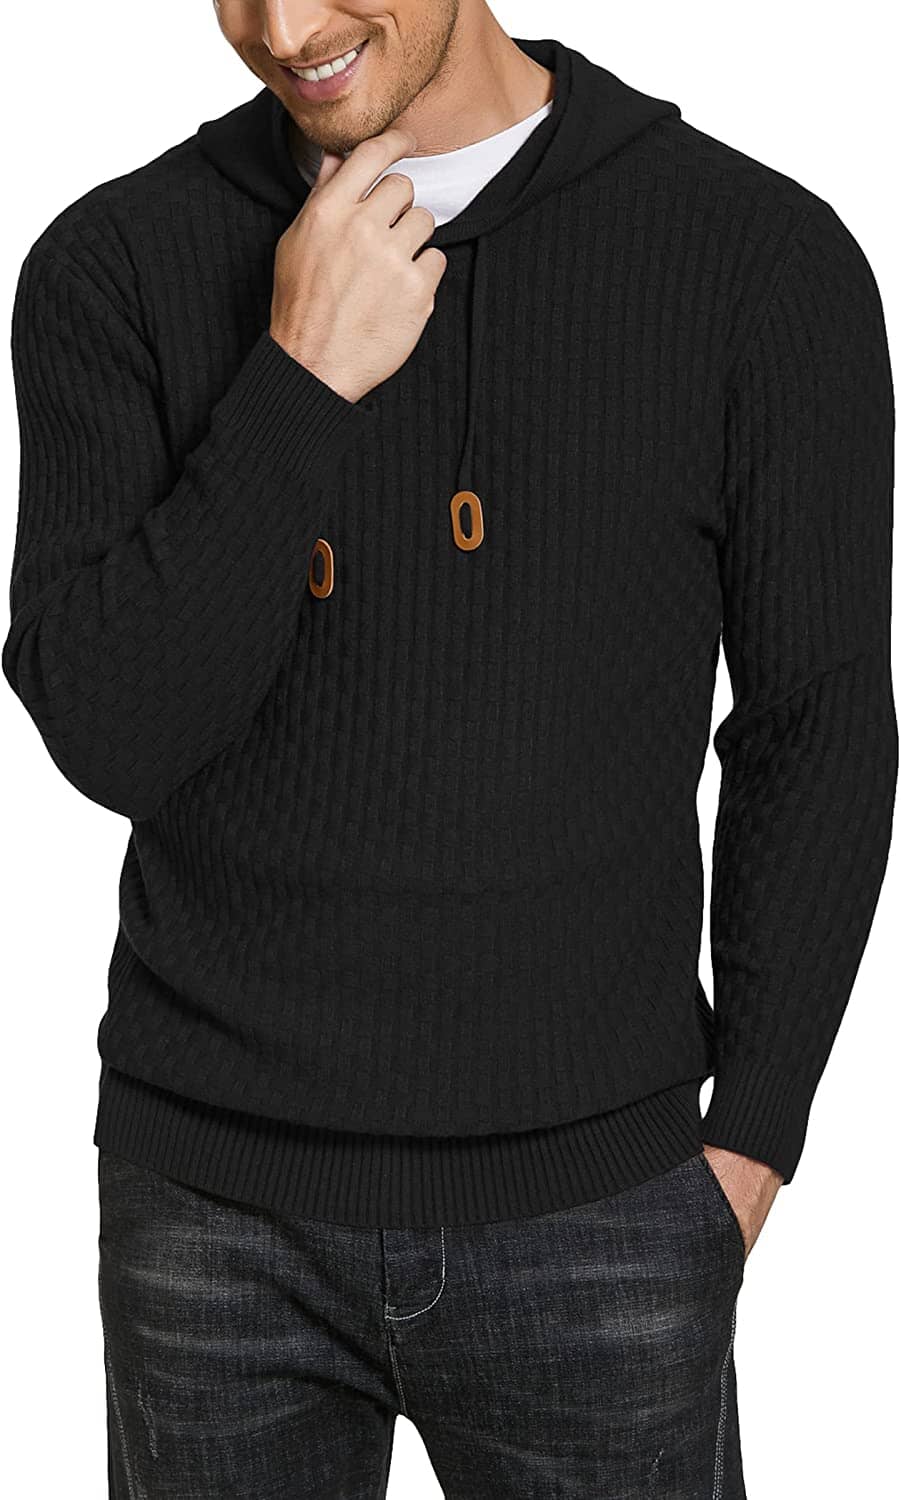 Solid Knitted Pullover Hooded Sweatshirt (US Only) Hoodies Brand: COOFANDY Black S 